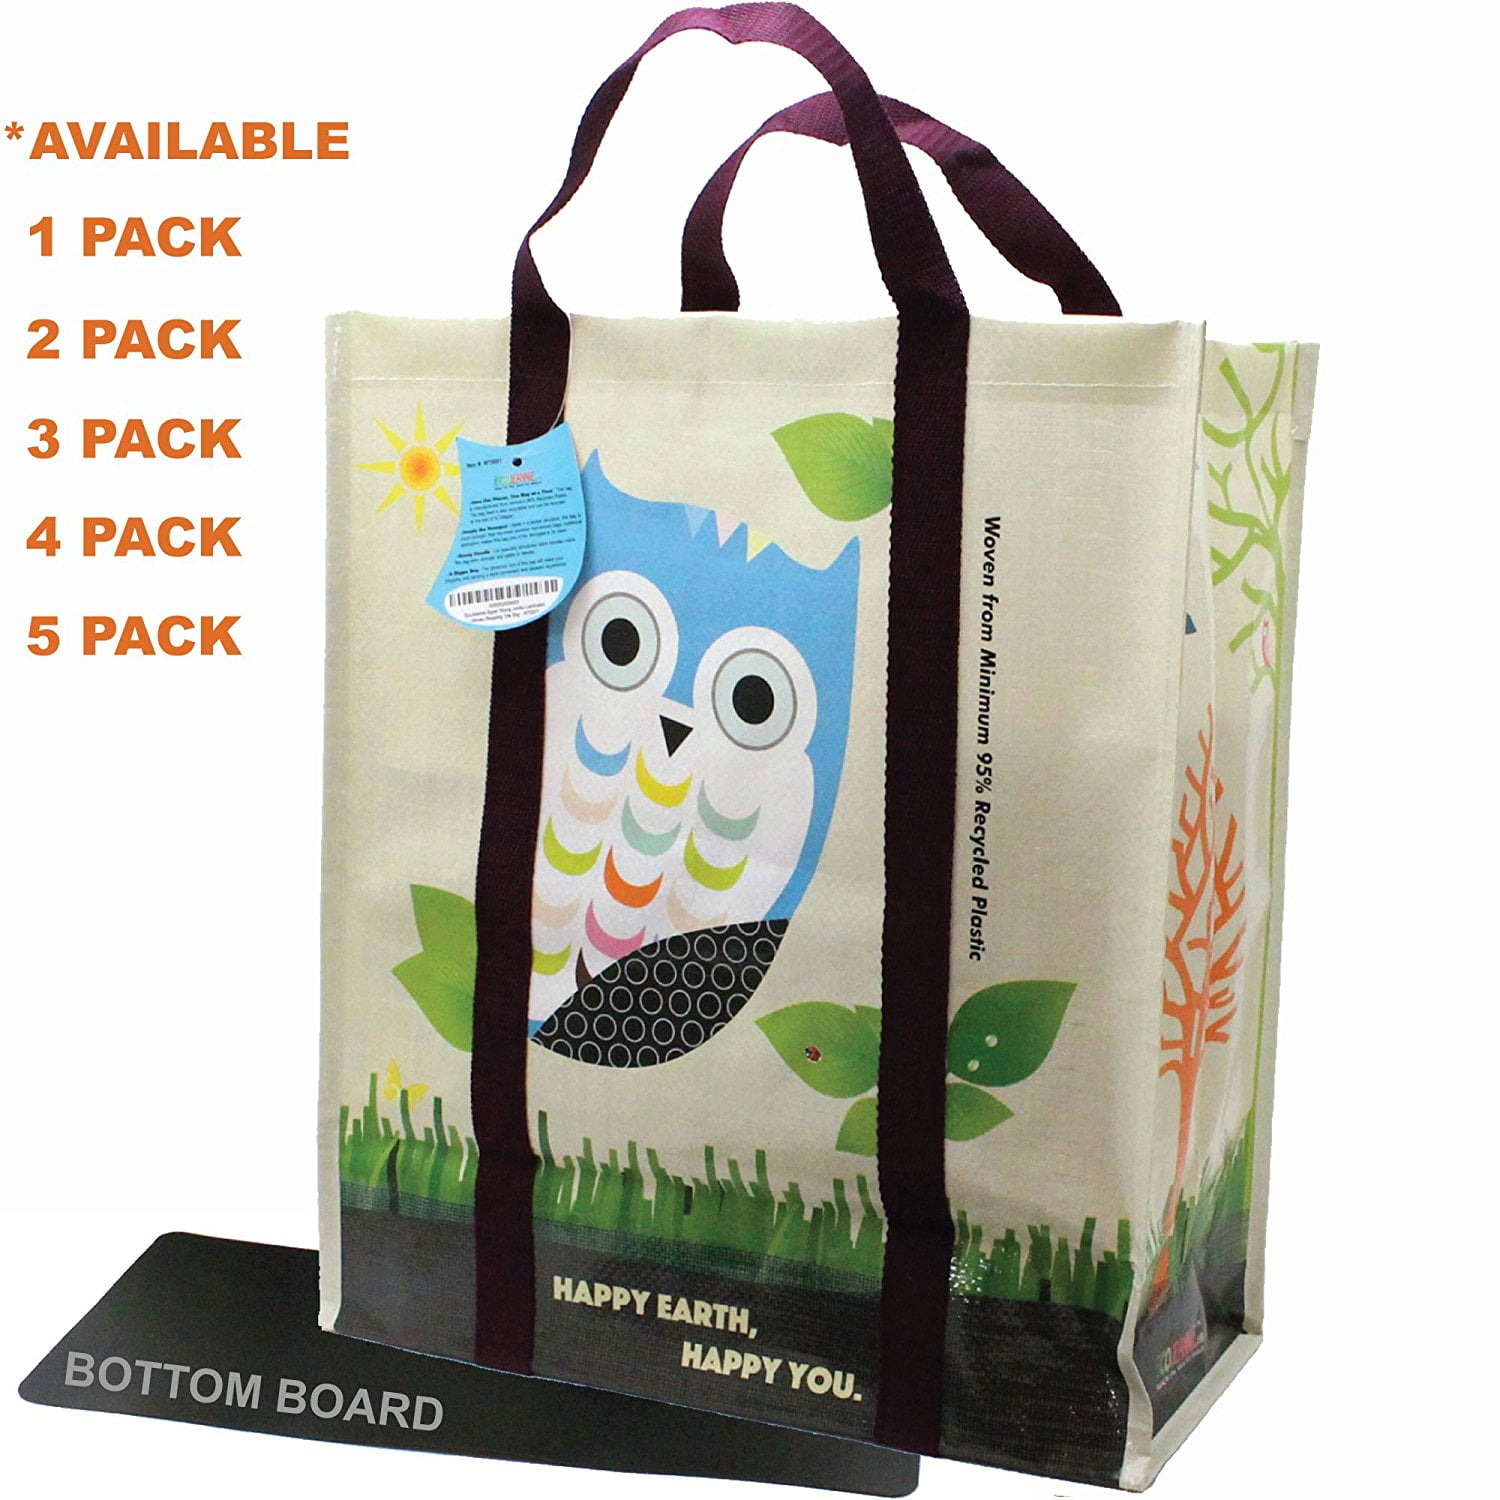 Customised Non Woven Bags Printing - Laminated Non Woven Bags